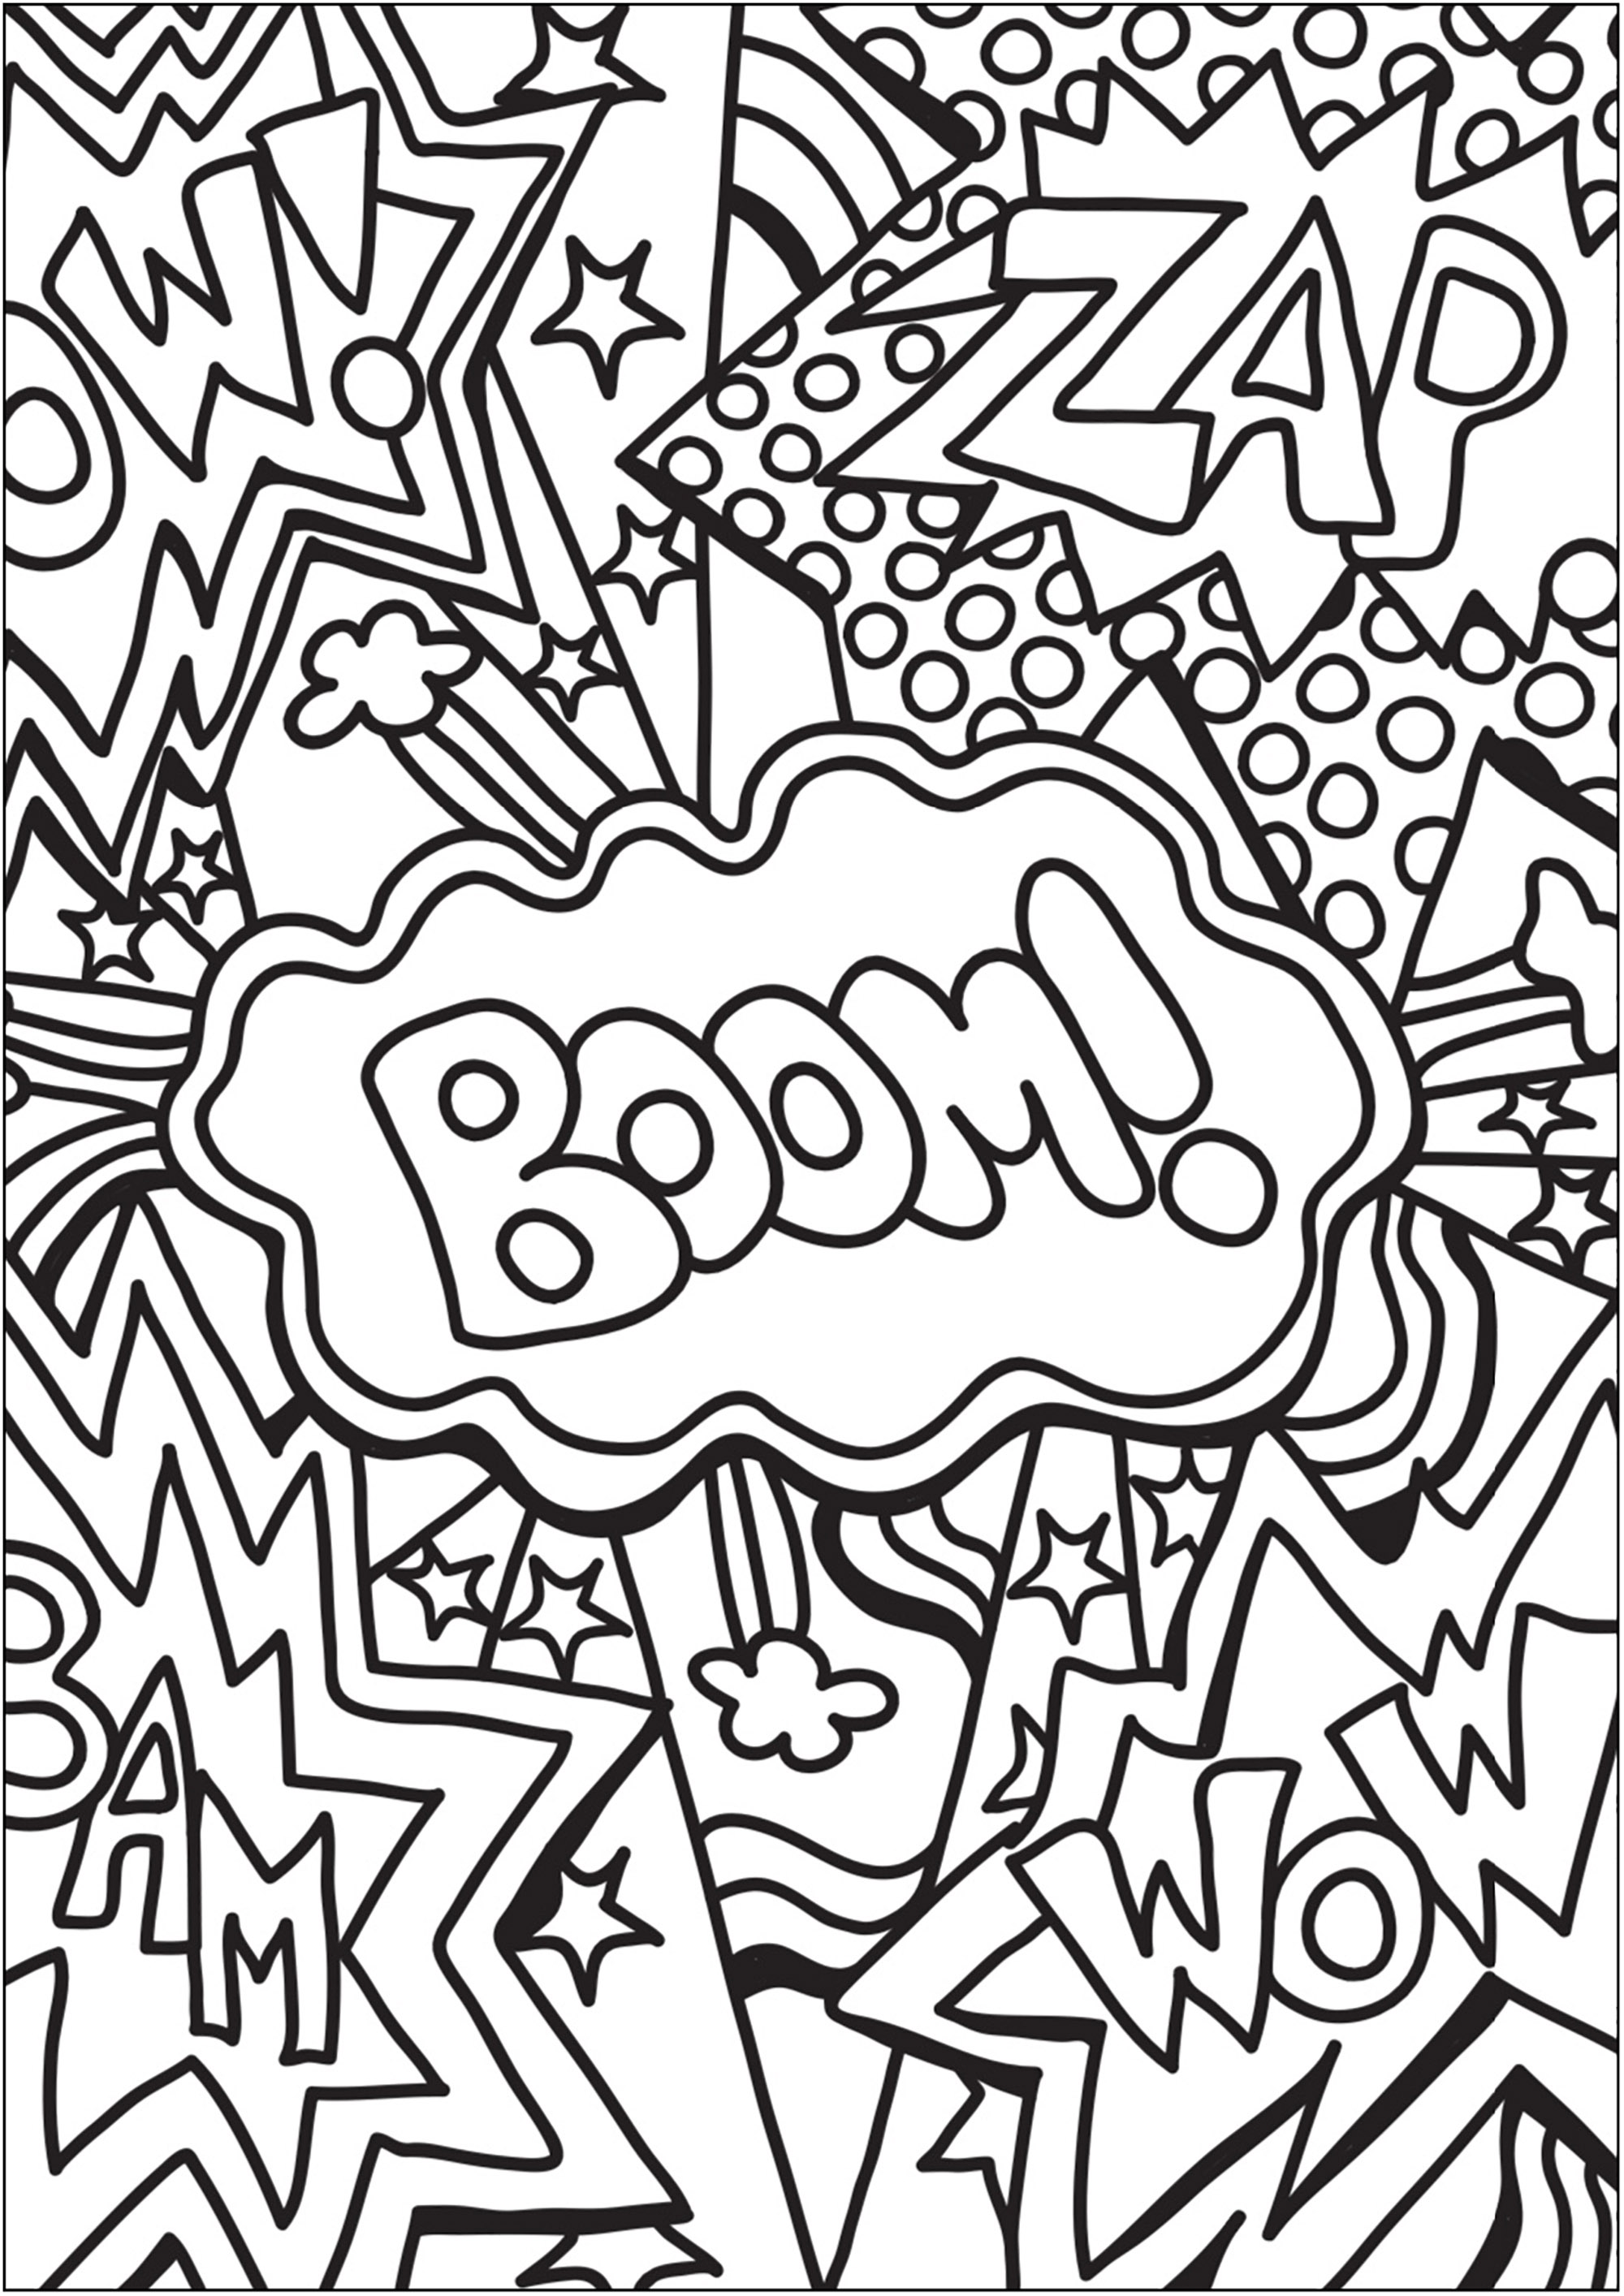 Onomatopoeia from Comic Books. Boom, Wow, Bam, Zap ... the usual little words found in comic books when there's action!